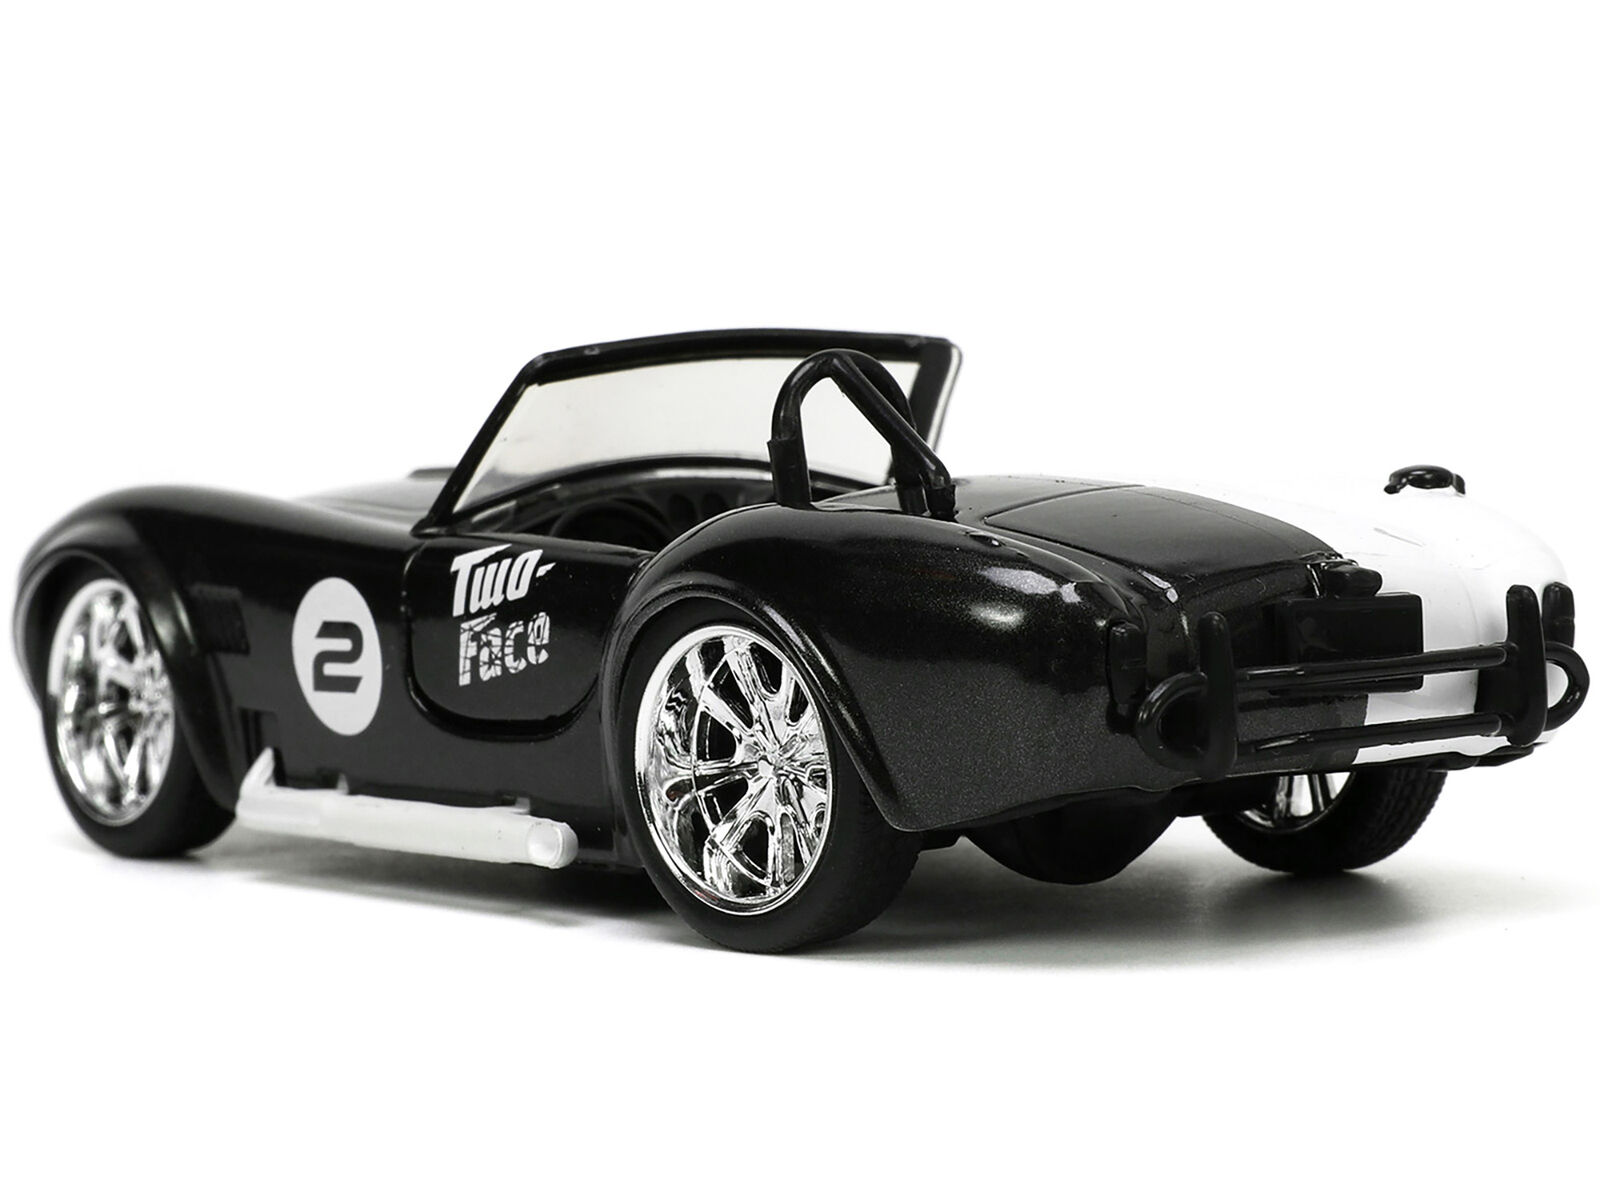 1965 Shelby Cobra 427 S/C #2 Black Metallic and White and Harvey Two-Face